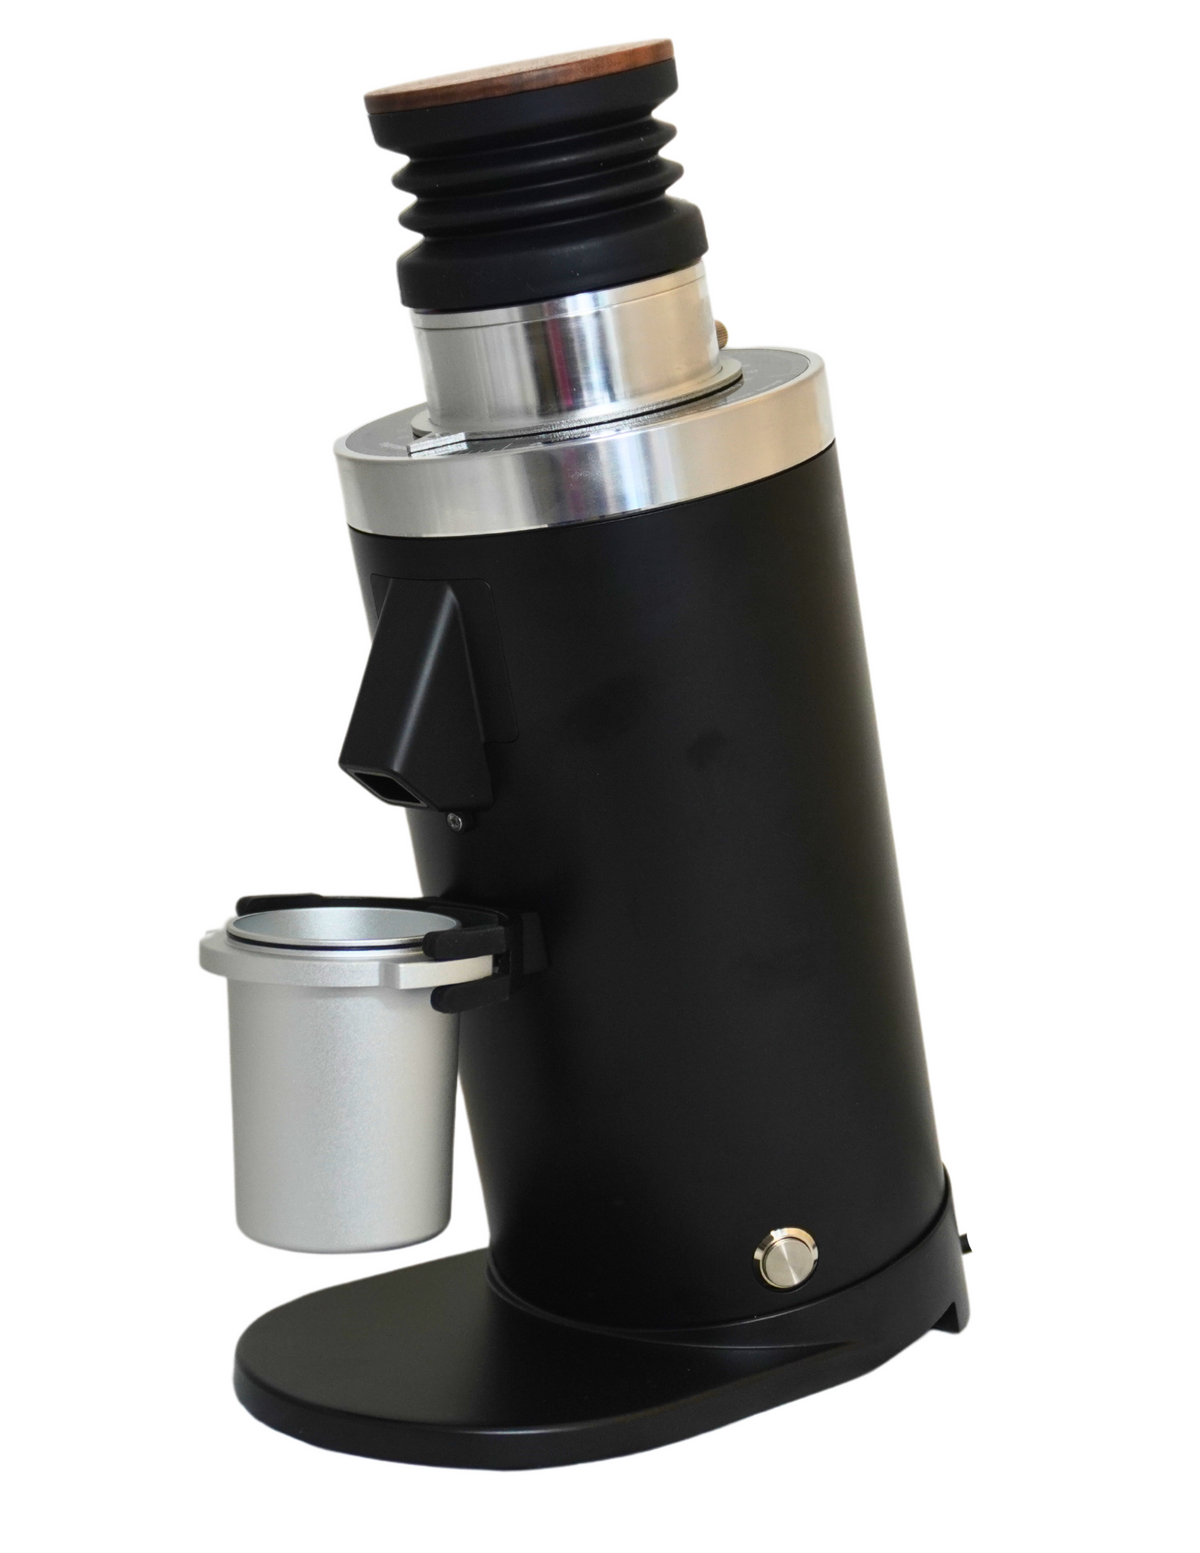 DF64 Gen 2 Single Dose Coffee Grinder With DLC Burrs on sale for $420 (lowest price ever)